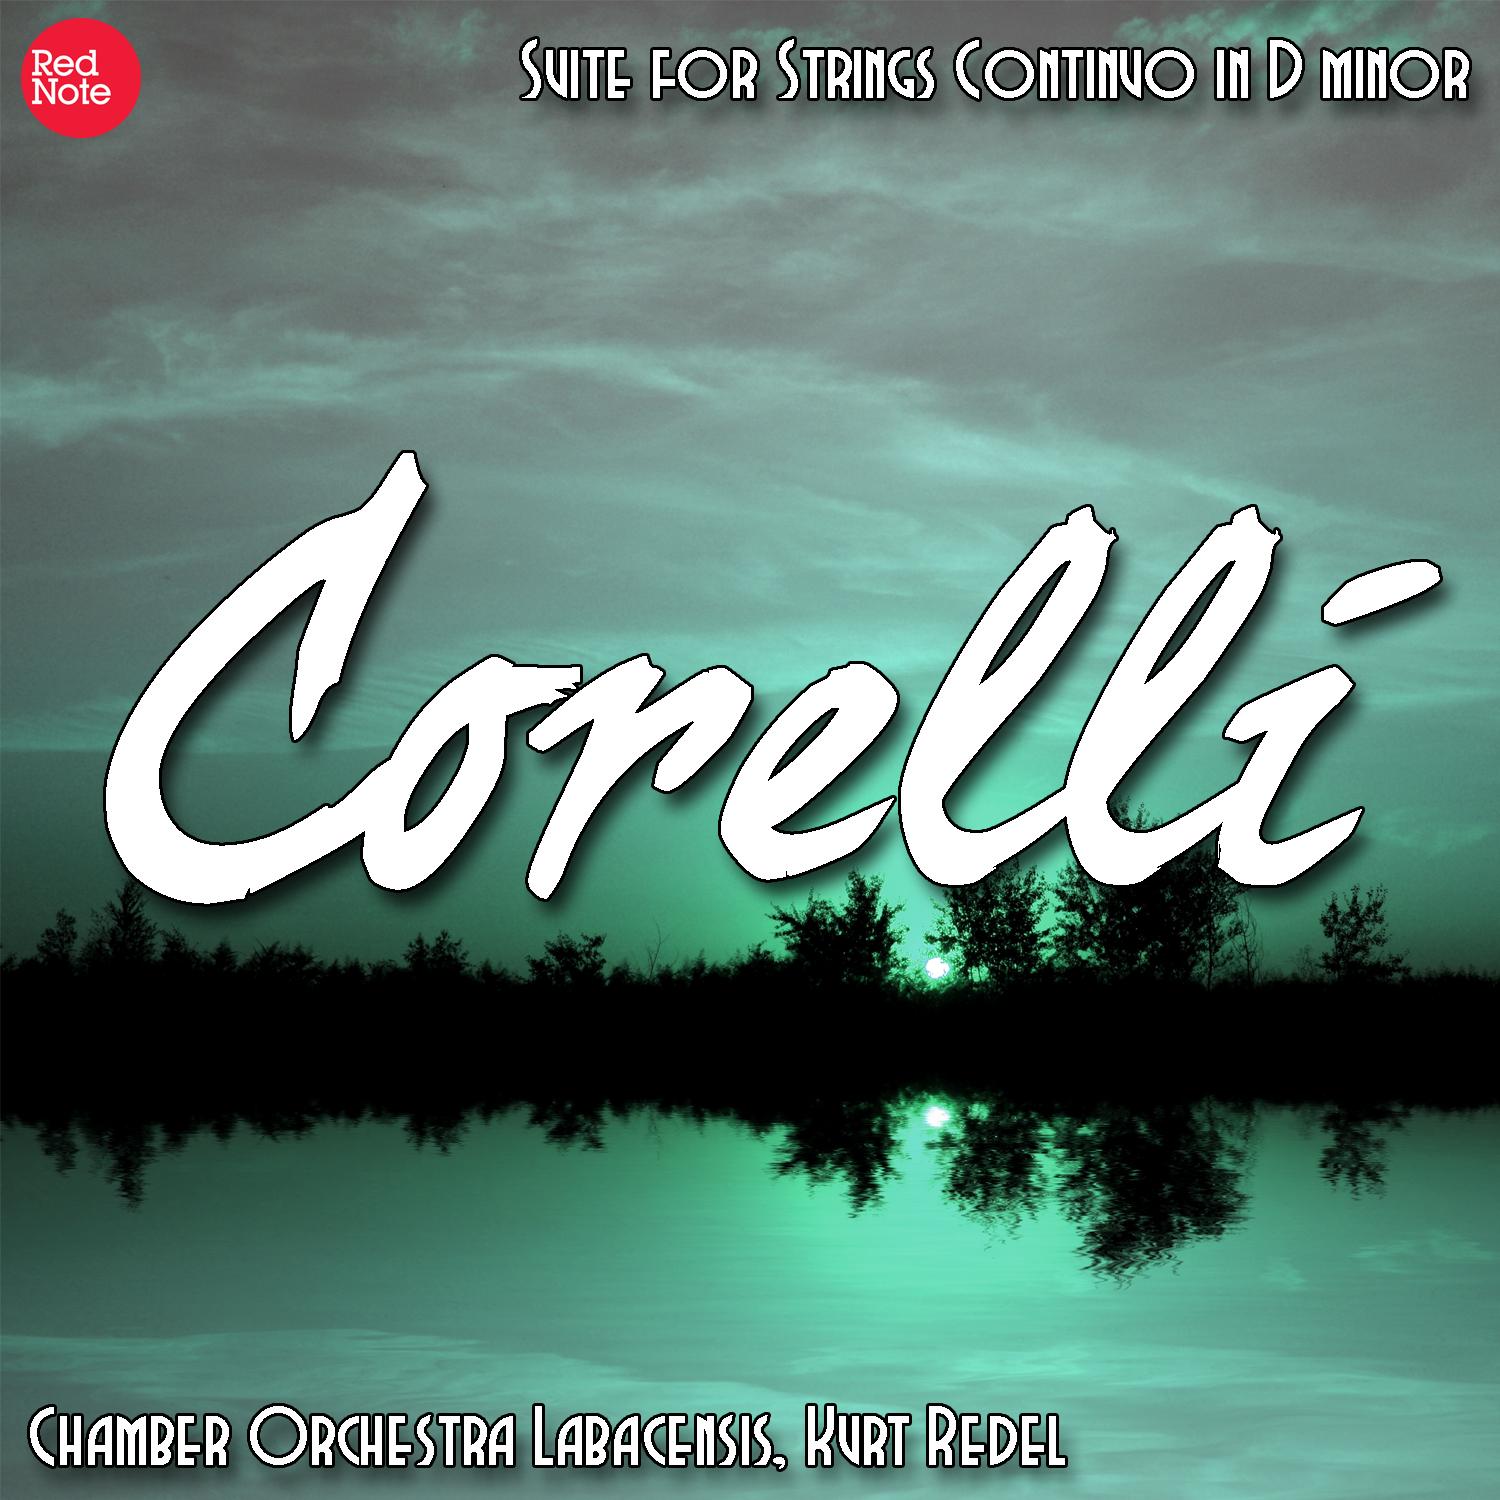 Corelli: Suite for Strings Continuo in D minor